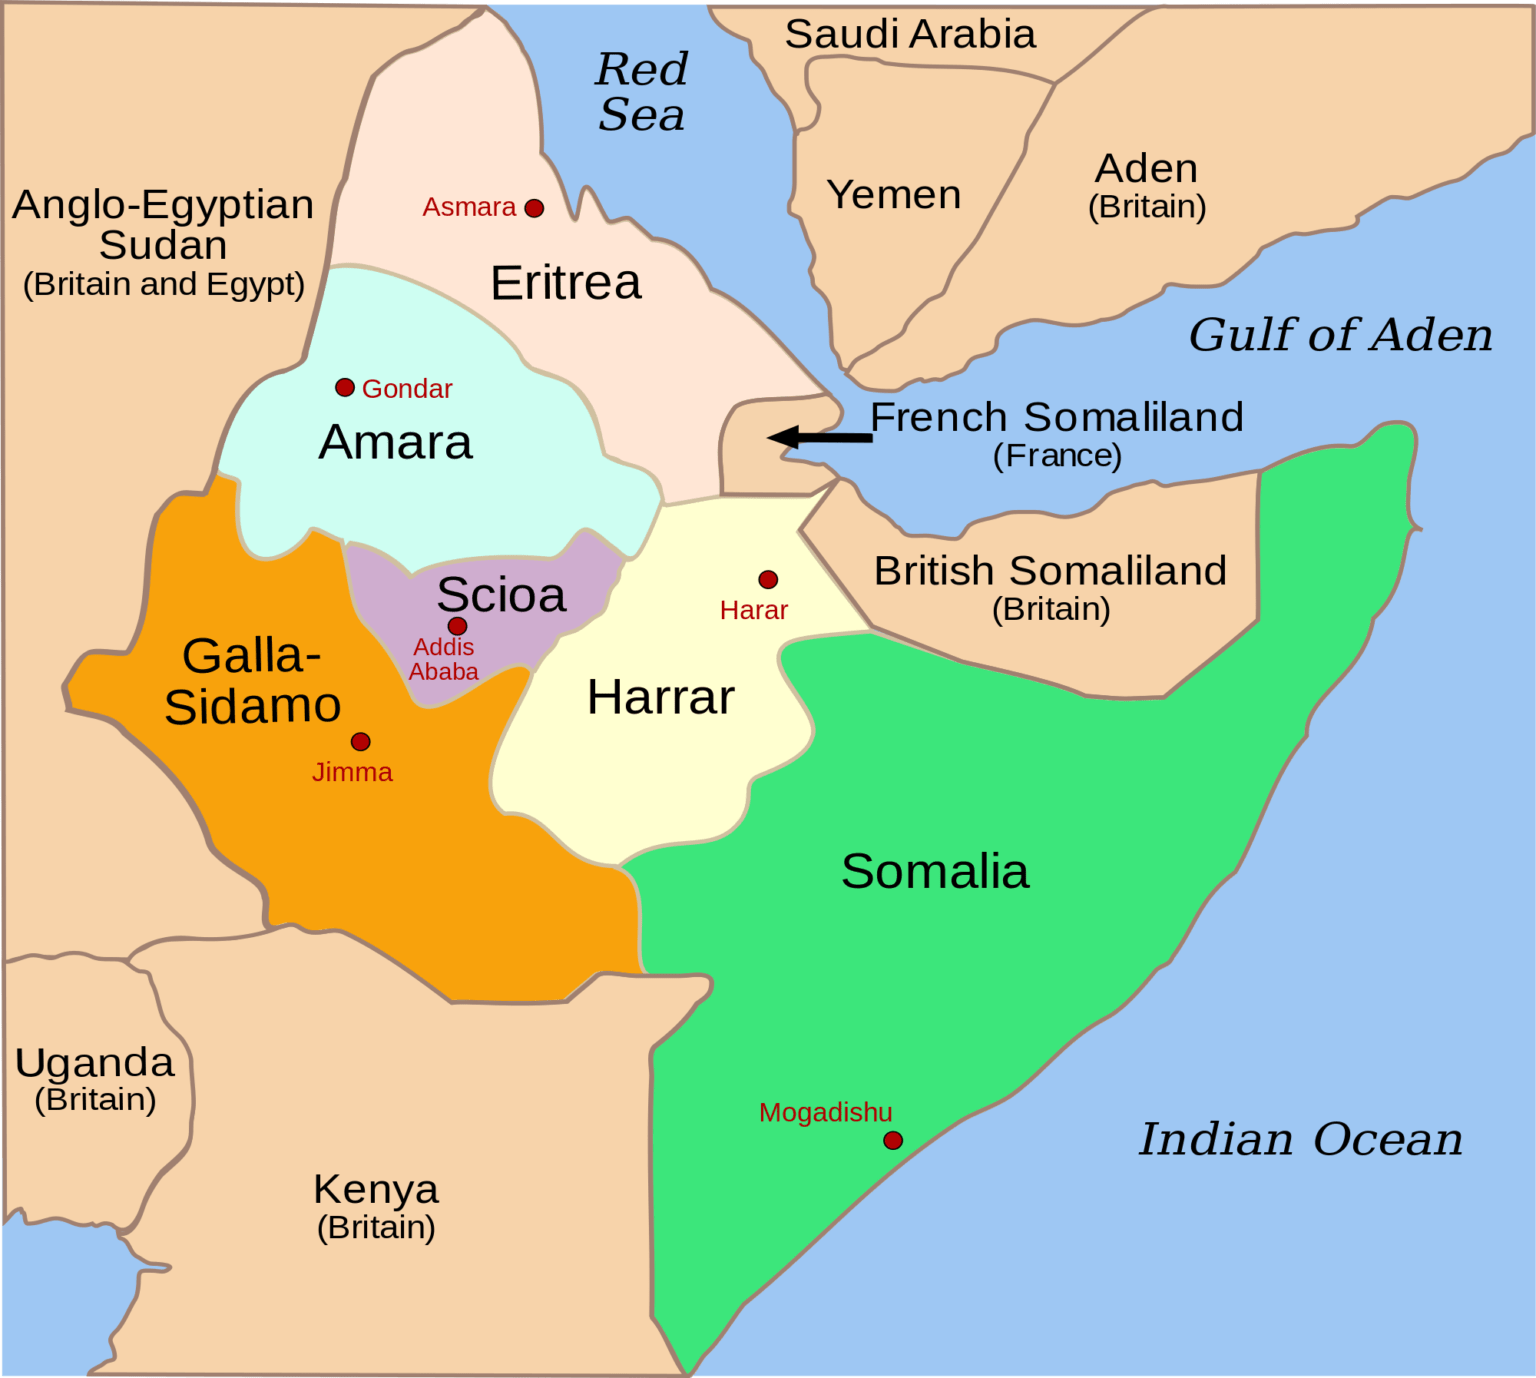 Somaliland: "Eritrea's Last Stand with Somali Map"